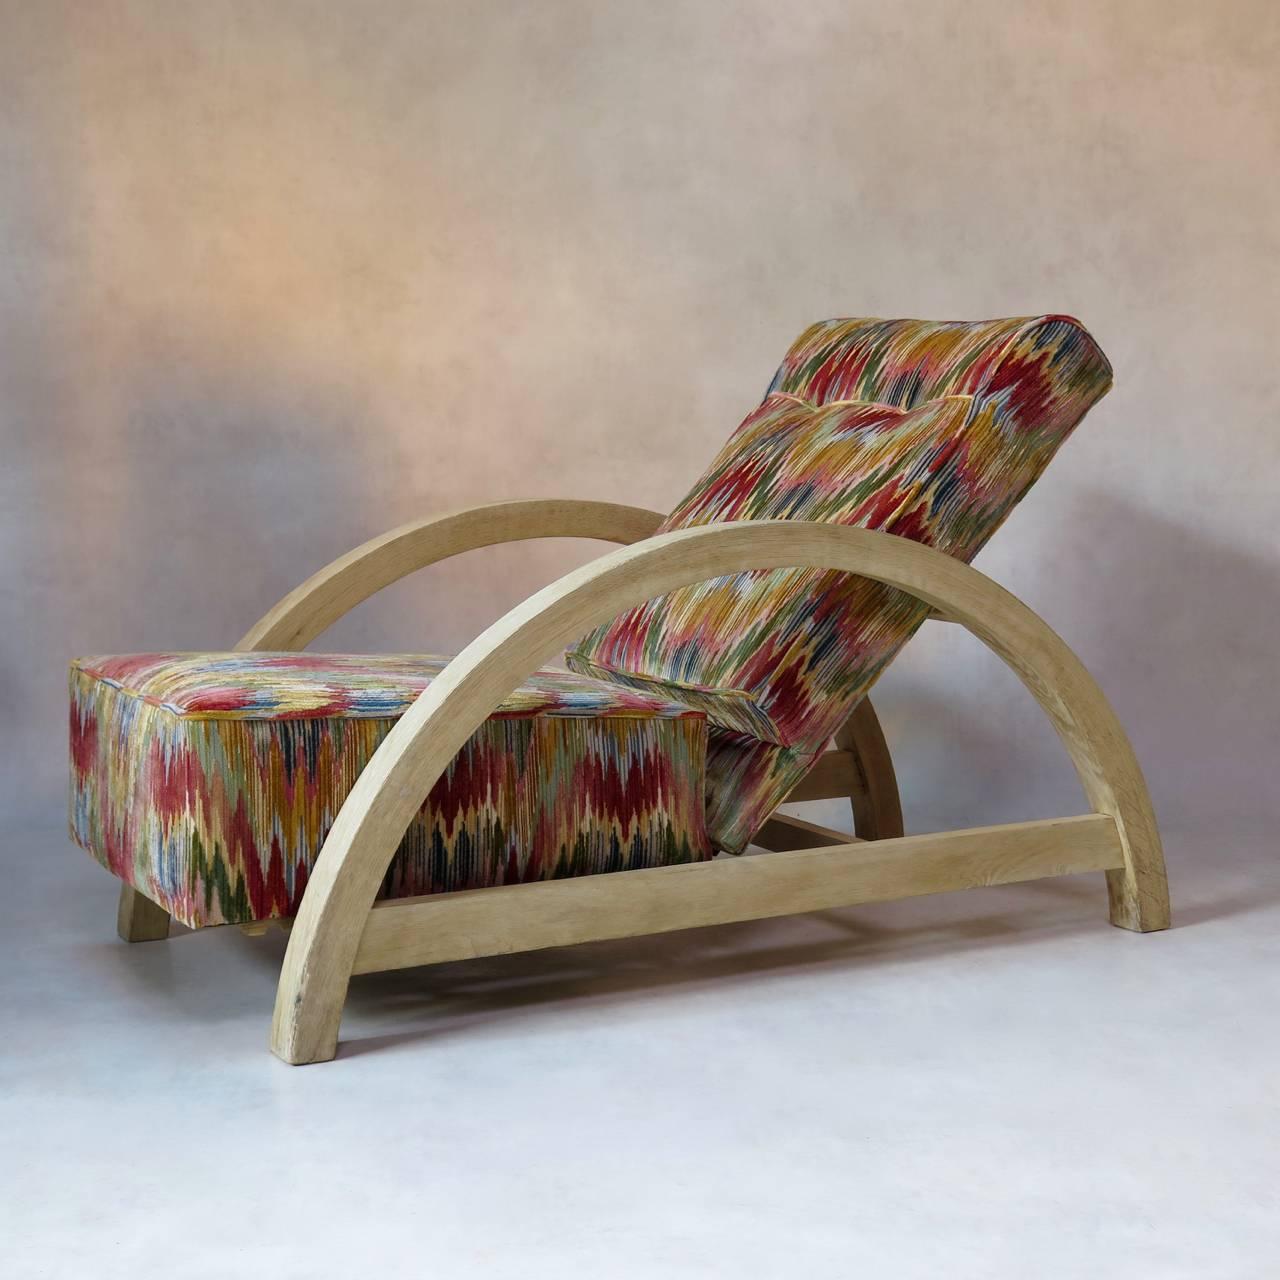 Large and comfortable Art Deco period armchair of unusual design. The structure presents a large and streamlined arc shape and is of brushed oak.
The seat and back have been newly upholstered in vintage ikat-like velvet fabric.
The chair is